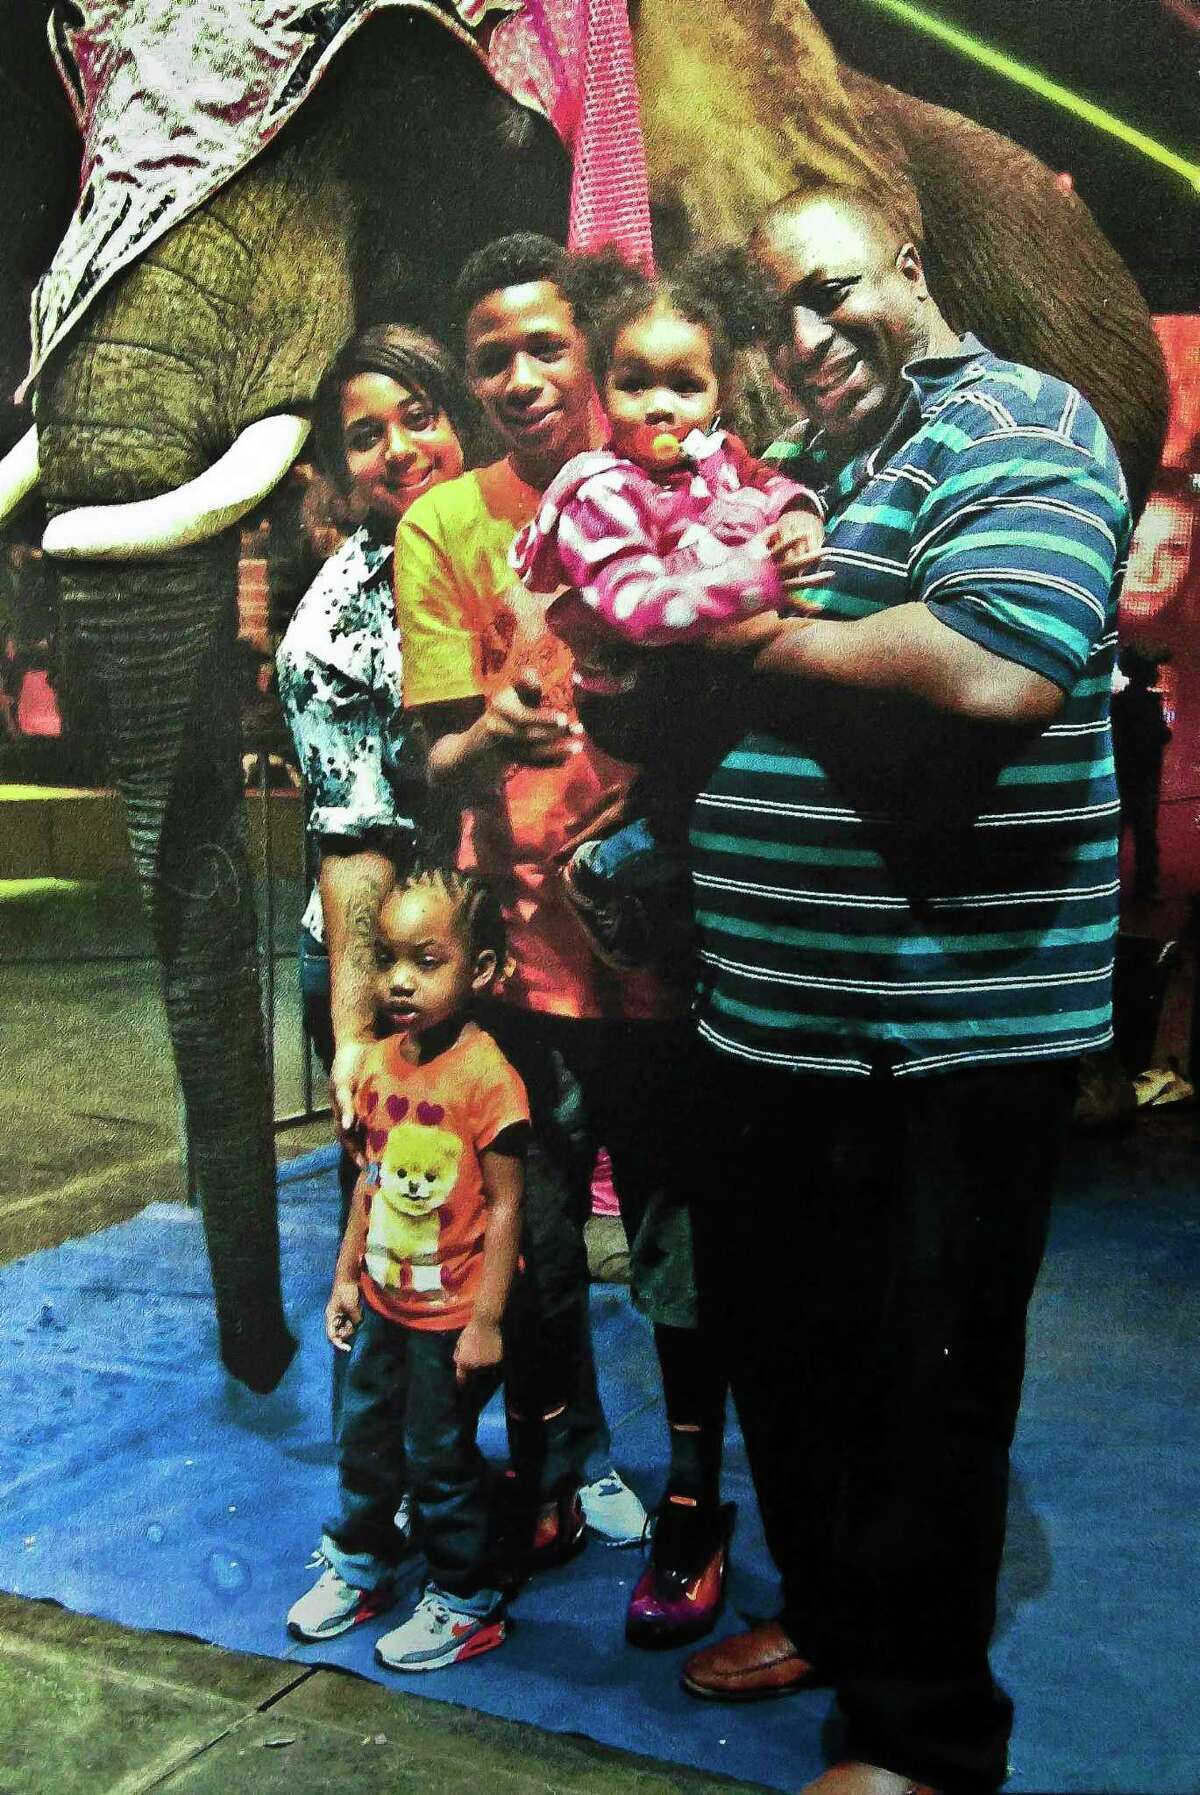 In this undated family file photo provided by the National Action Network, Saturday, July 19, 2014, Eric Garner, right, poses with his children during a family outing.